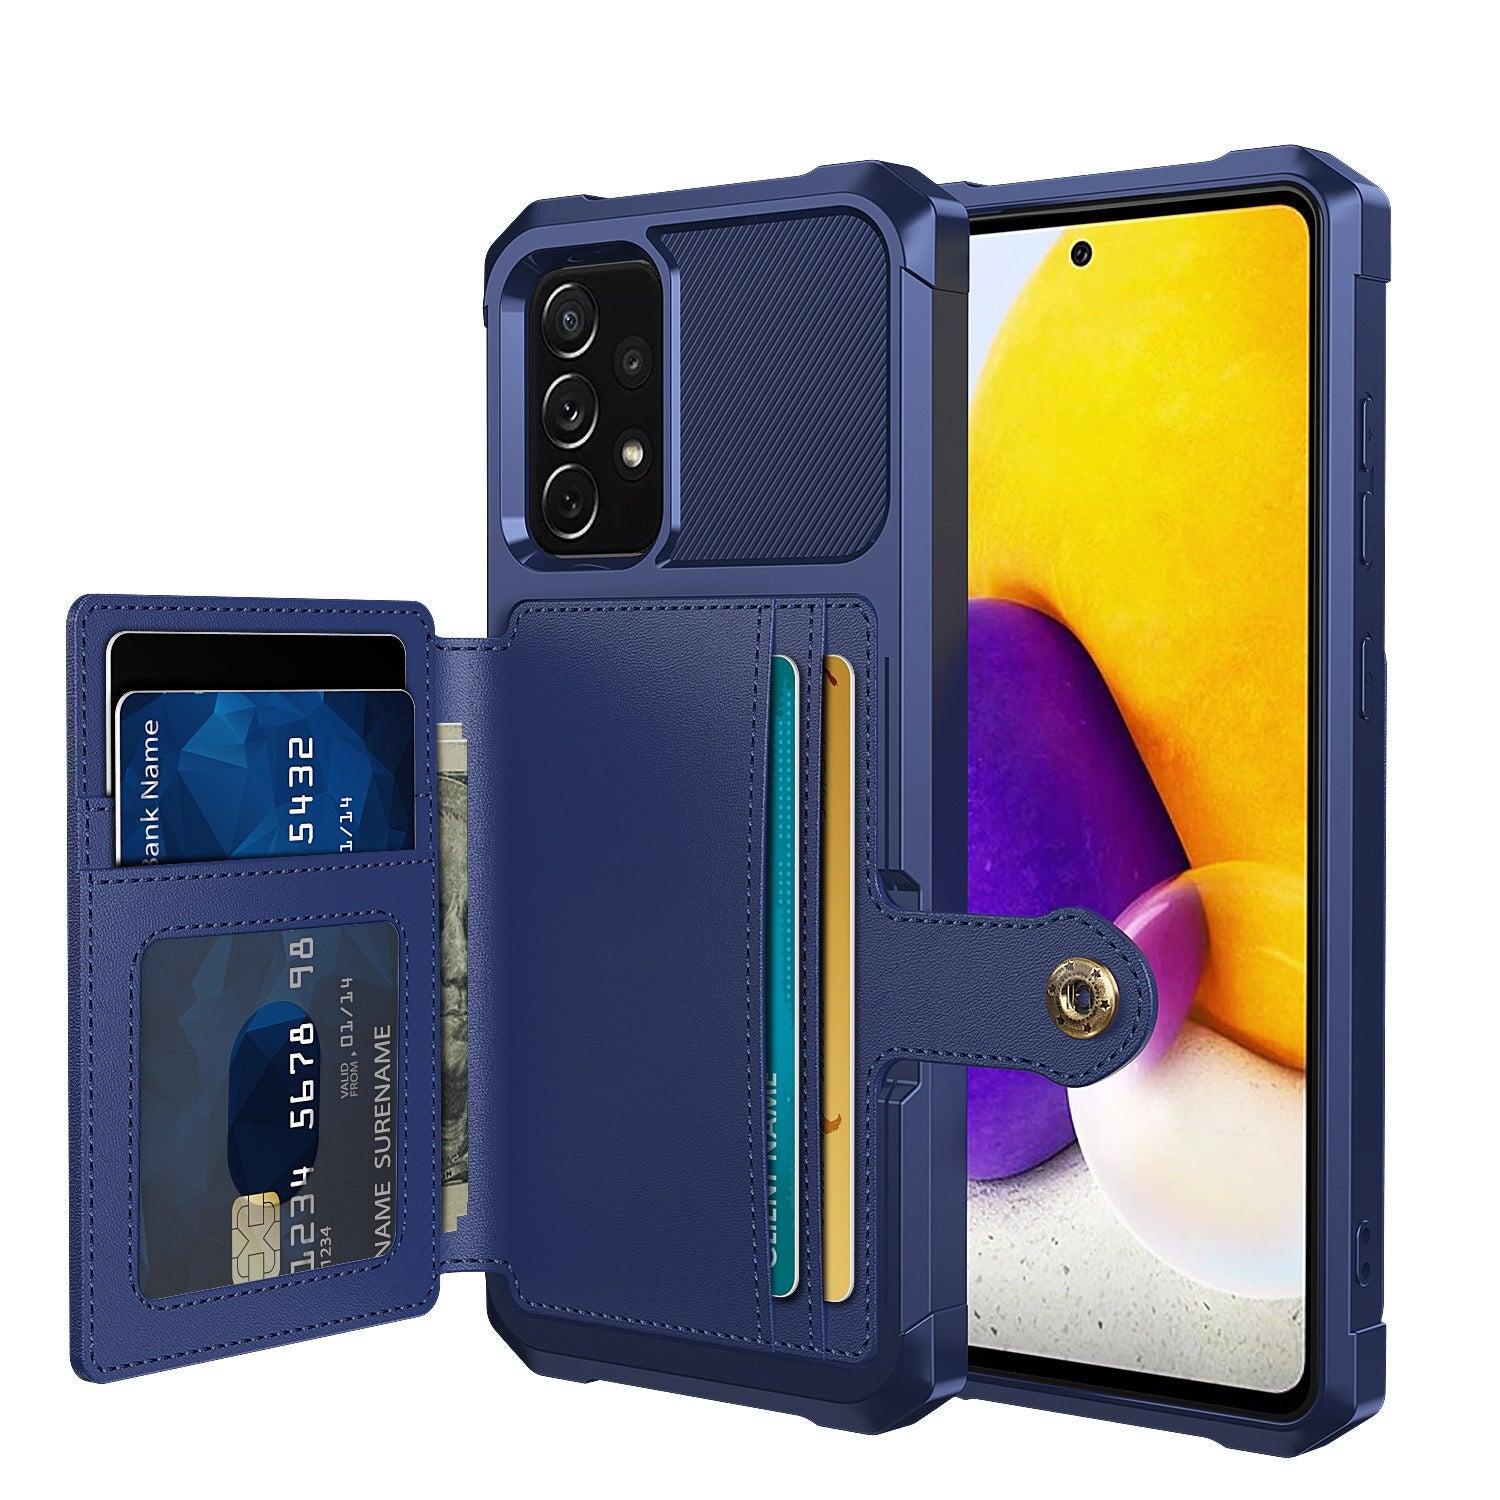 Samsung Galaxy A52/A72 Wallet Case, Luxury PU Leather Wallet Flip Cover Buckle - 380230 for Galaxy A52 / Blue / United States Find Epic Store